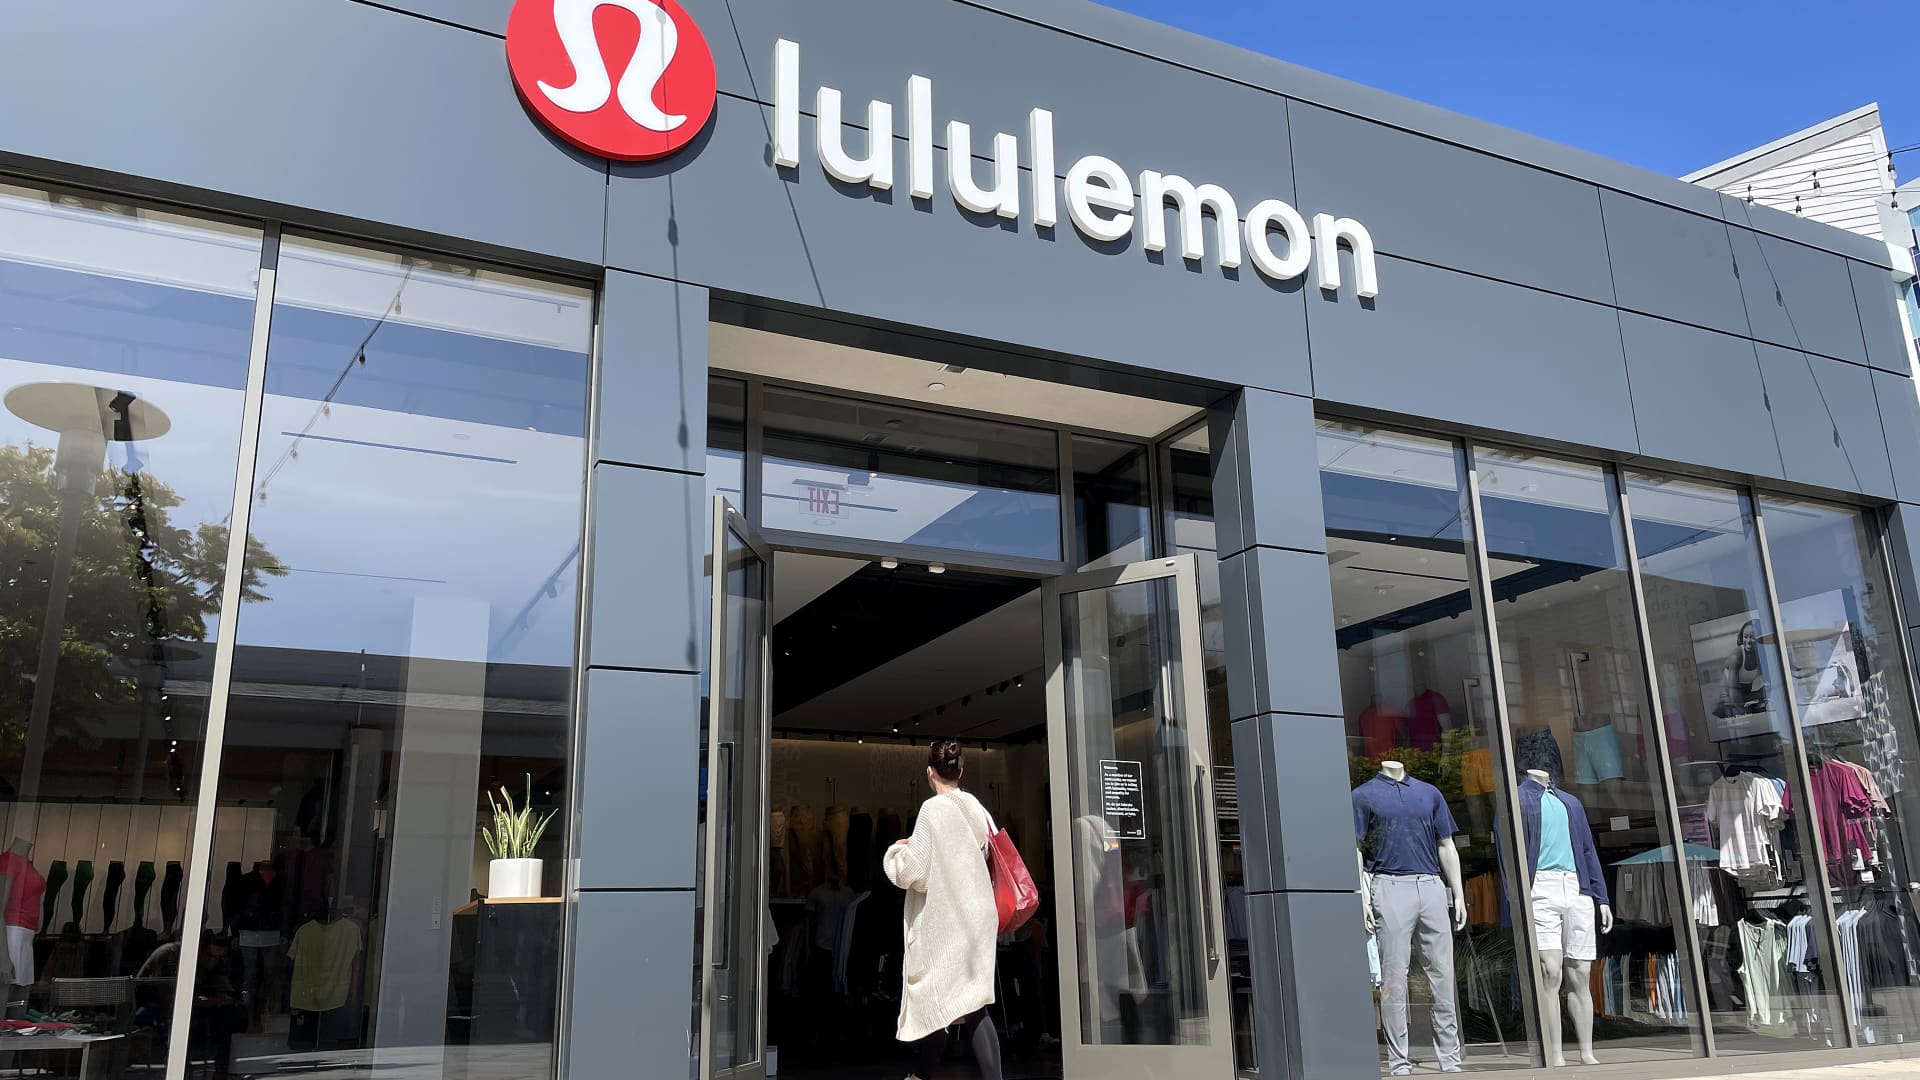 1 Stock to Buy, 1 Stock to Sell This Week: Lululemon, Pfizer